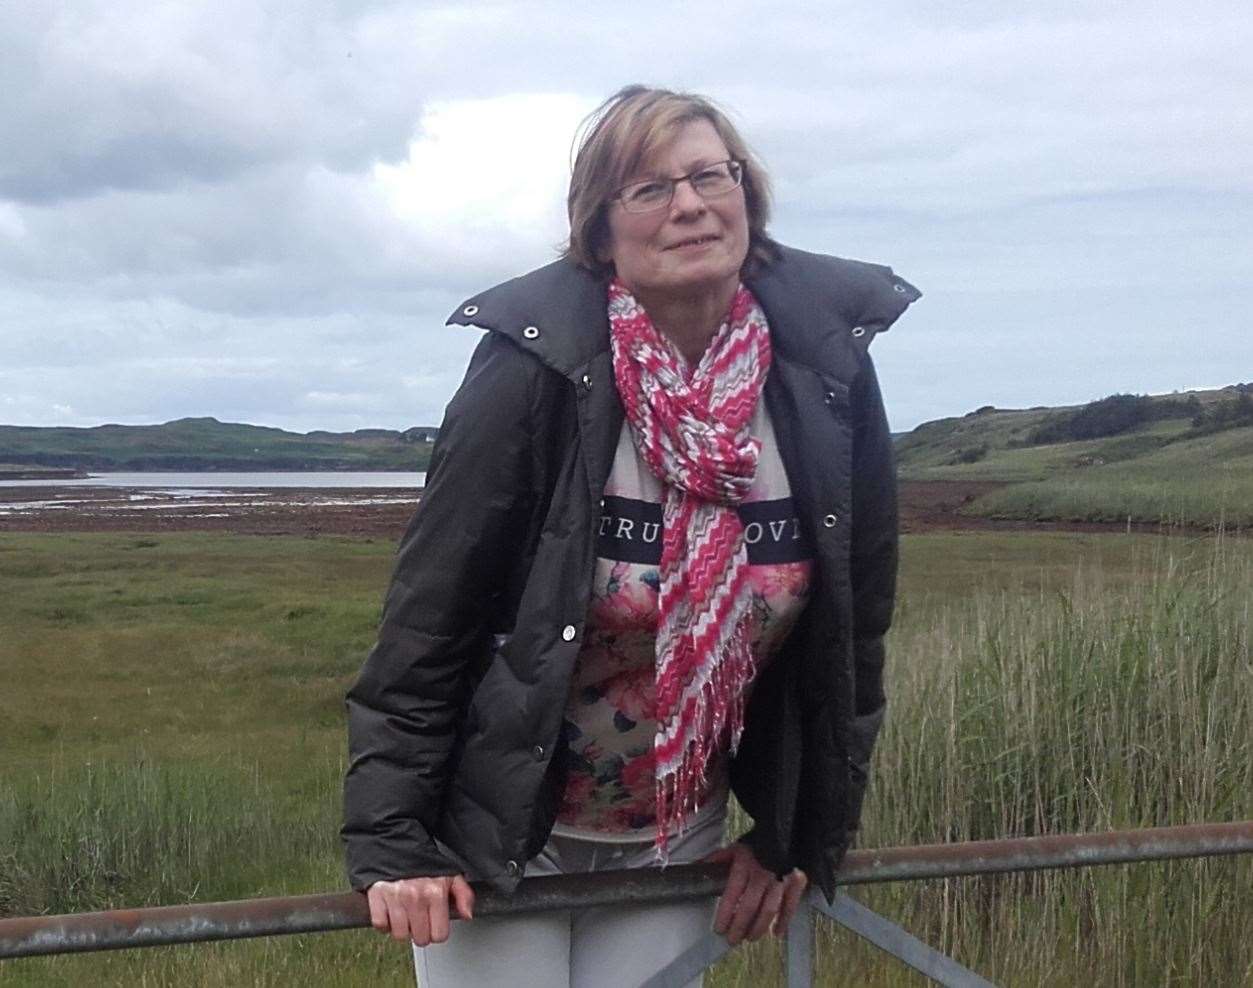 Caroline Hunt is believed to have travelled from her home on the Isle of Skye to the Sevenoaks area